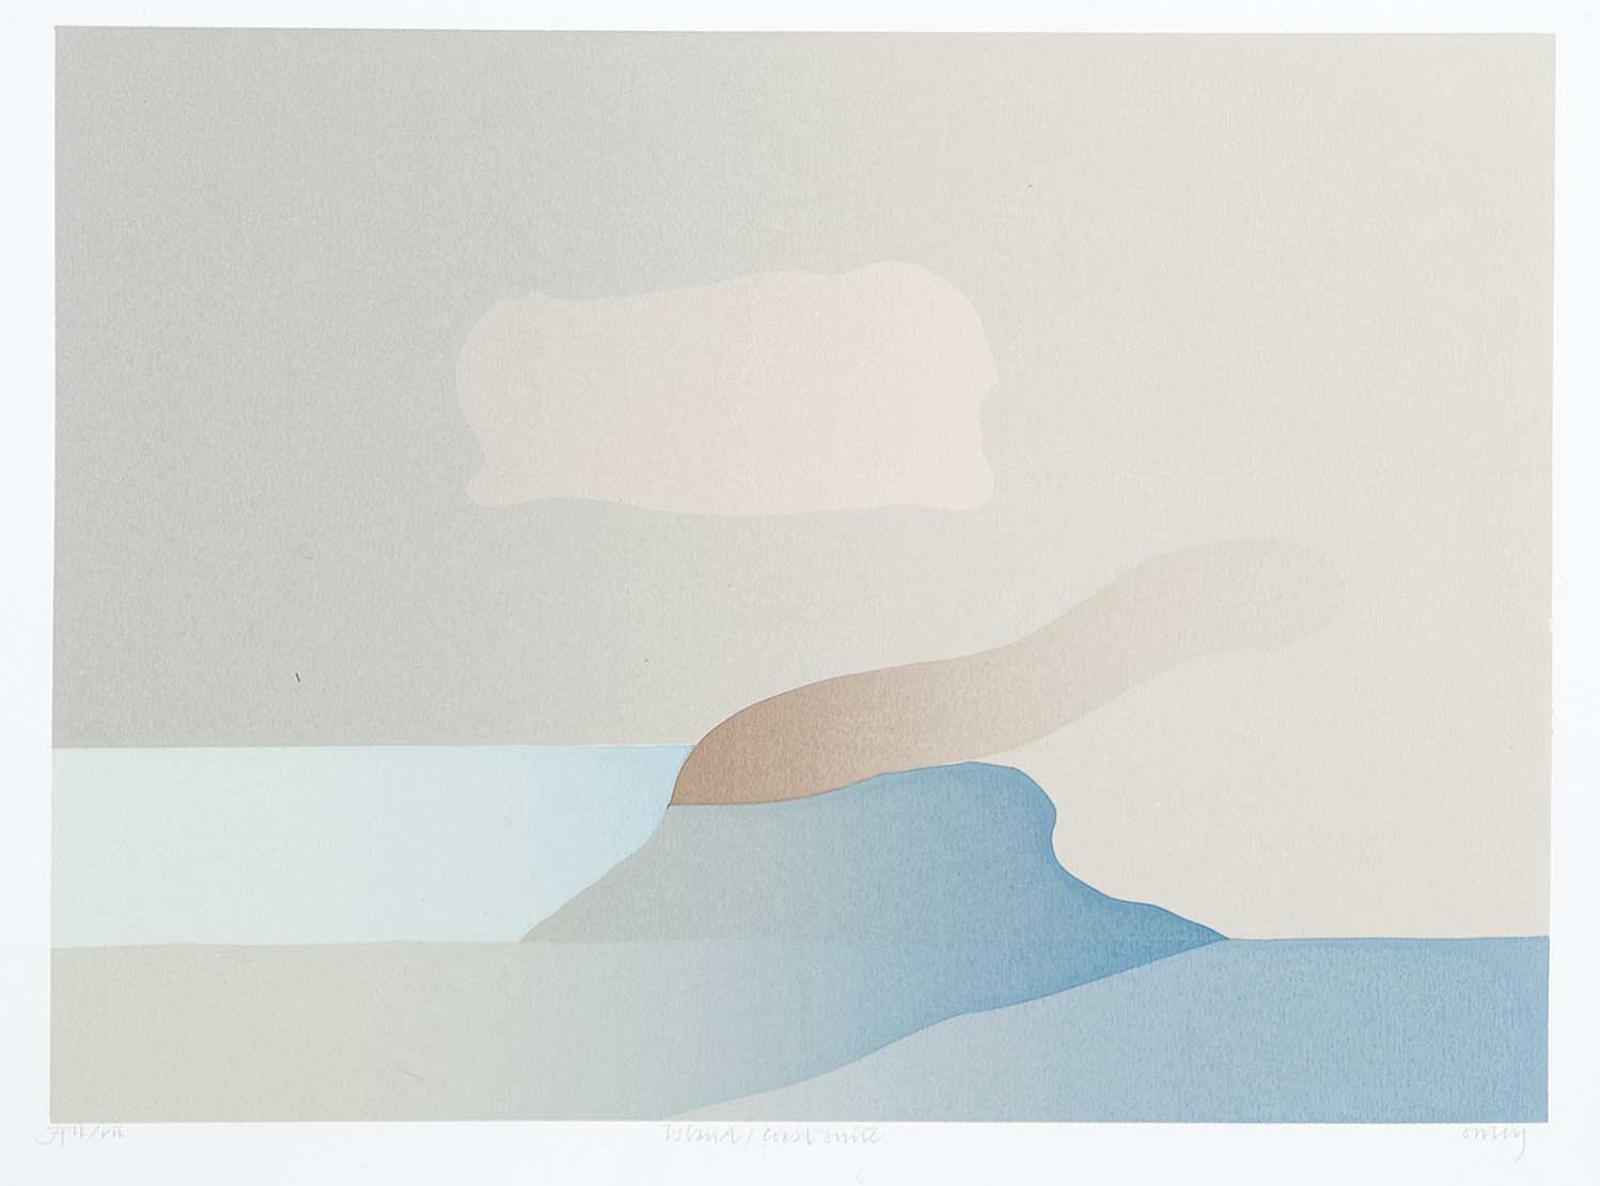 Norman Anthony (Toni) Onley (1928-2004) - Island / Coast Suite  #A.P. ii/vii